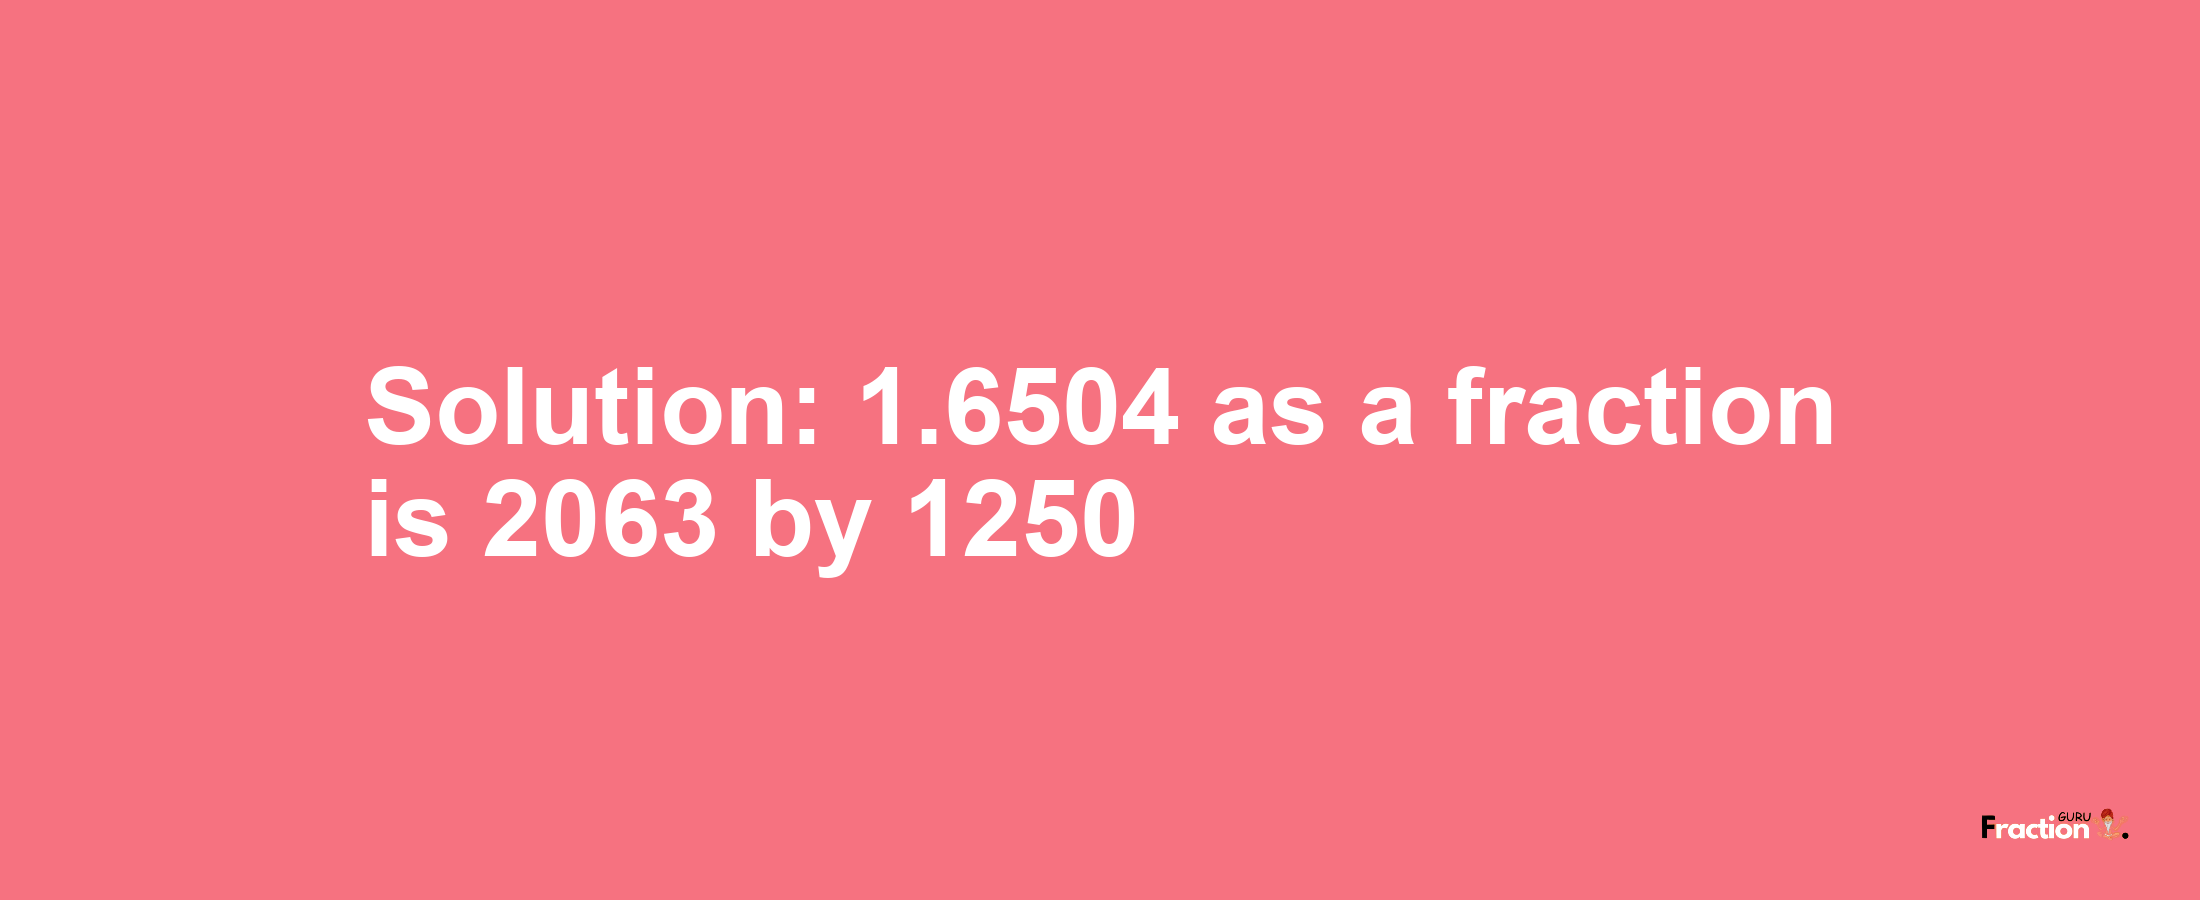 Solution:1.6504 as a fraction is 2063/1250